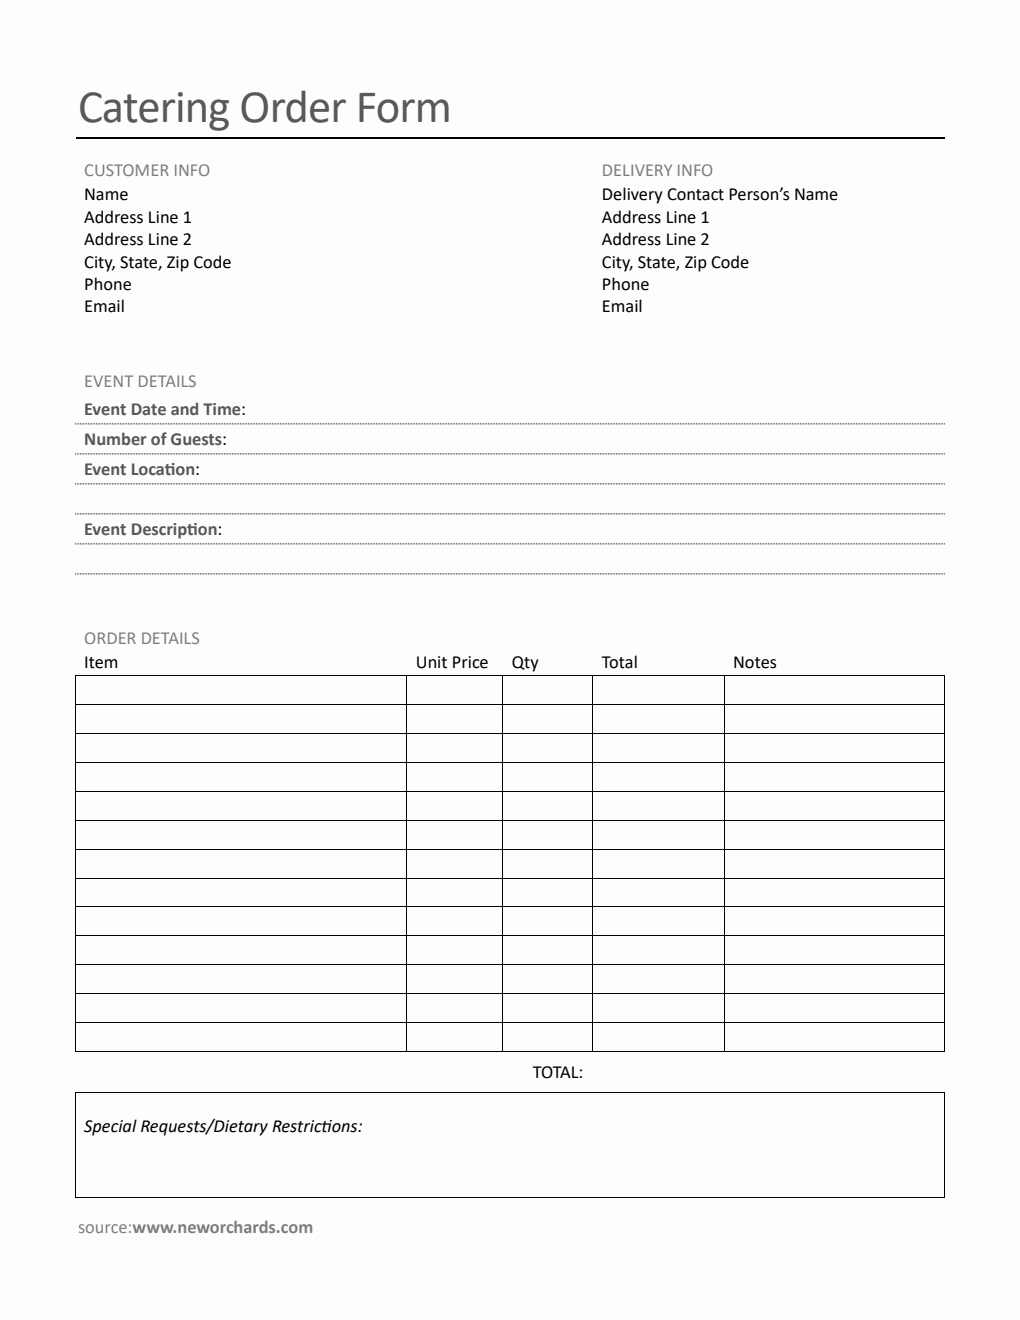 Printable Catering Order Form Template in Word